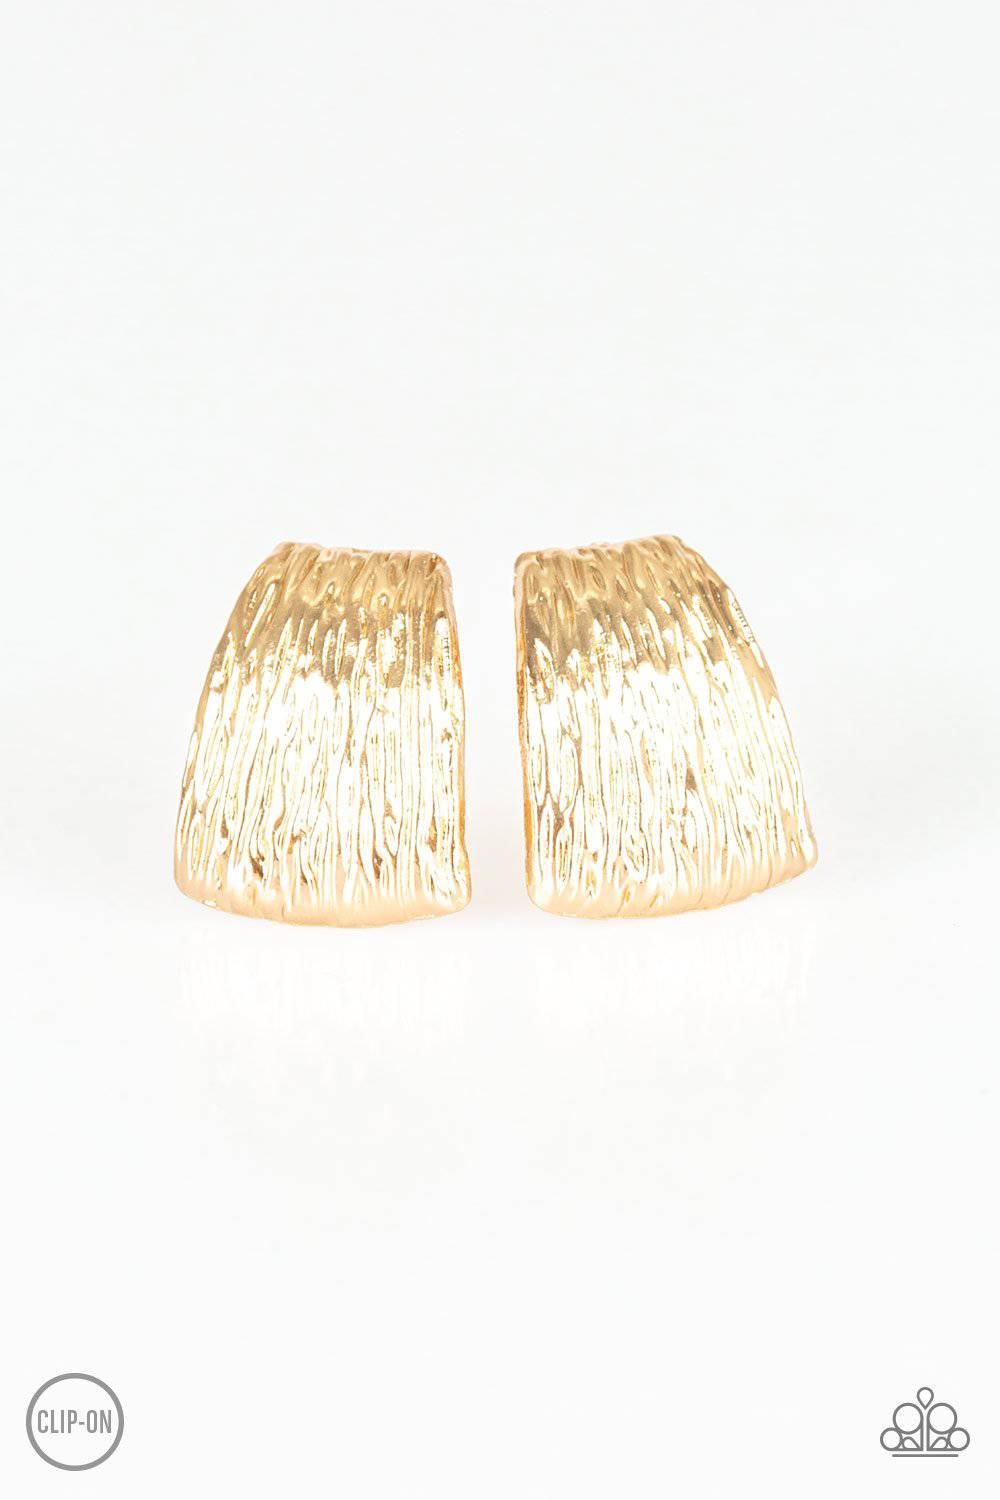 Superstar Shimmer Gold Clip-on Earrings - Paparazzi Accessories - GlaMarous Titi Jewels